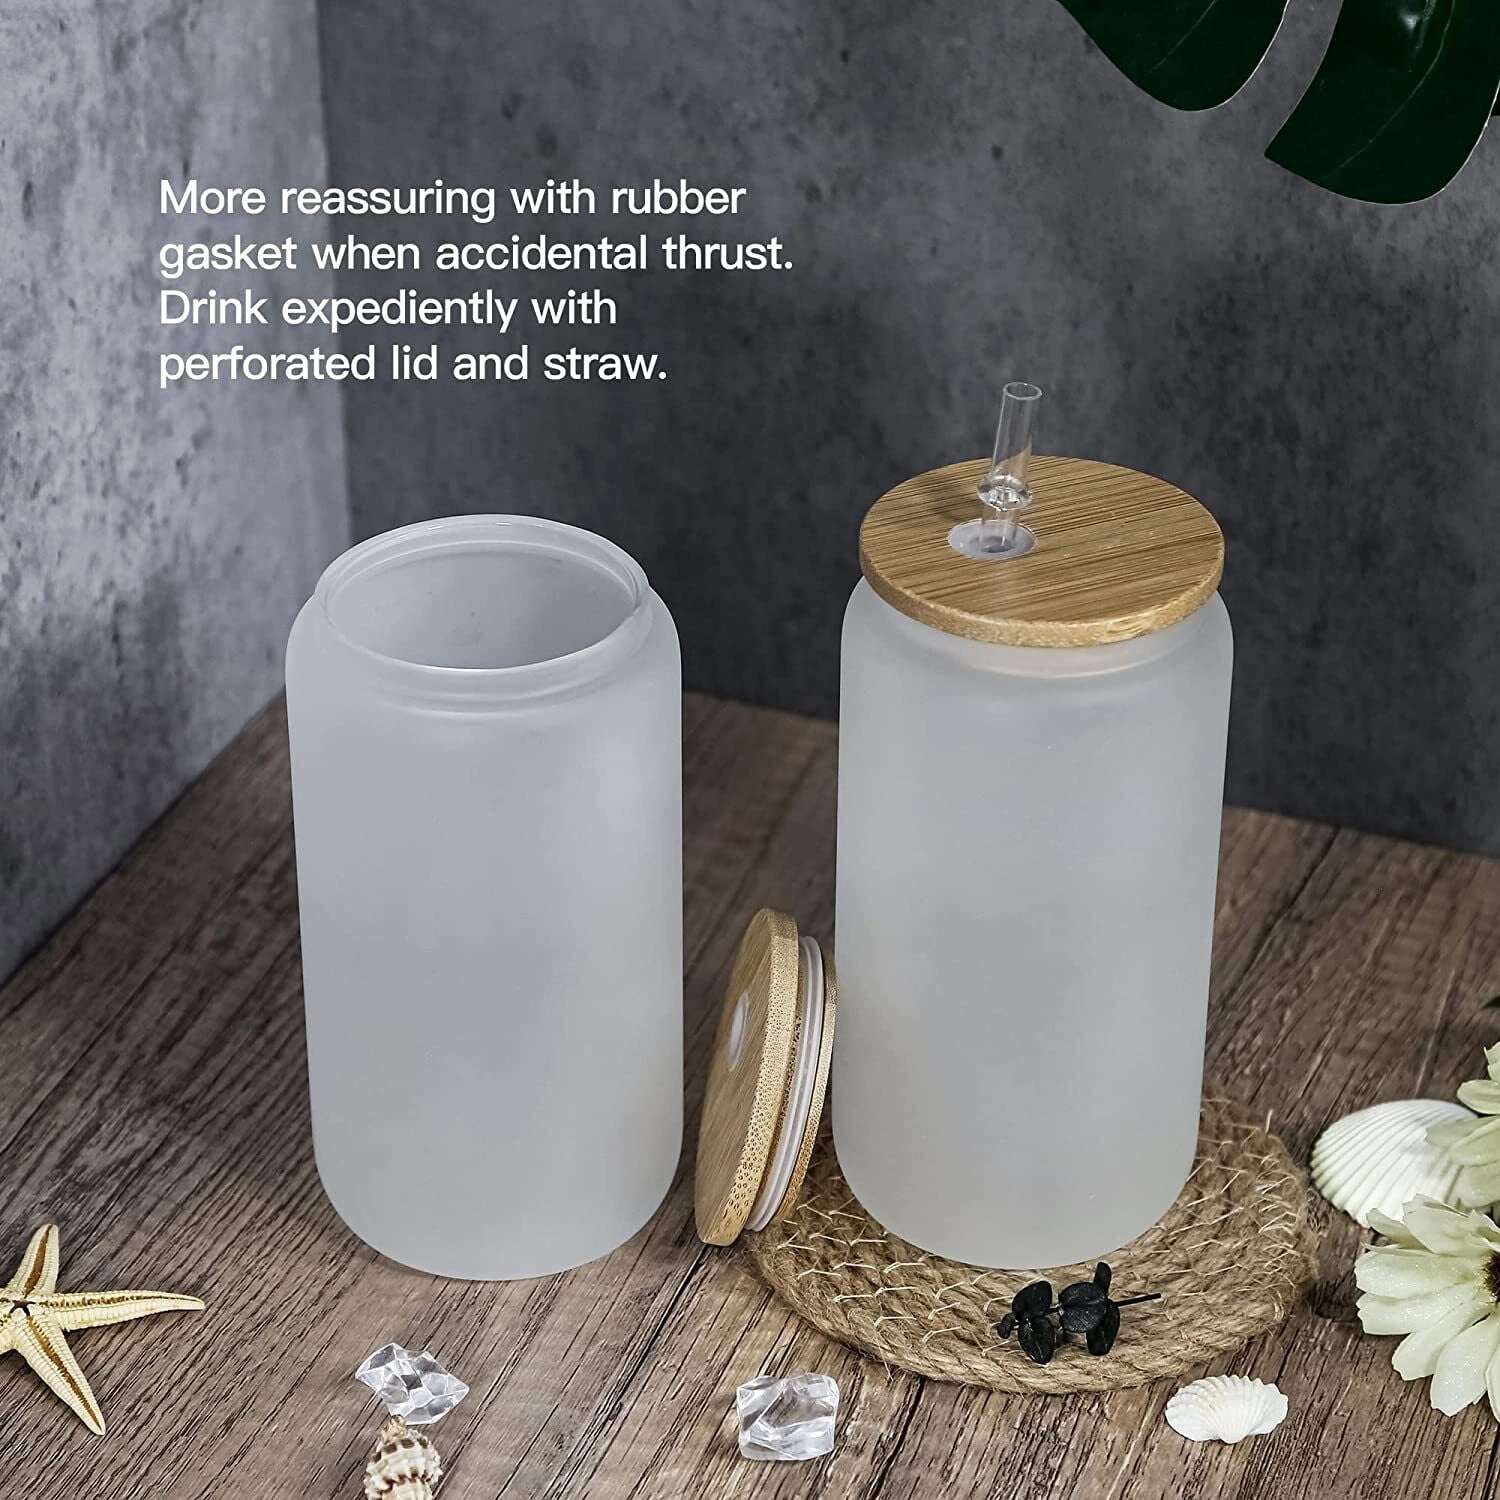 16 oz Sublimation frosted soda glass jar w/ bamboo lid – We Sub'N